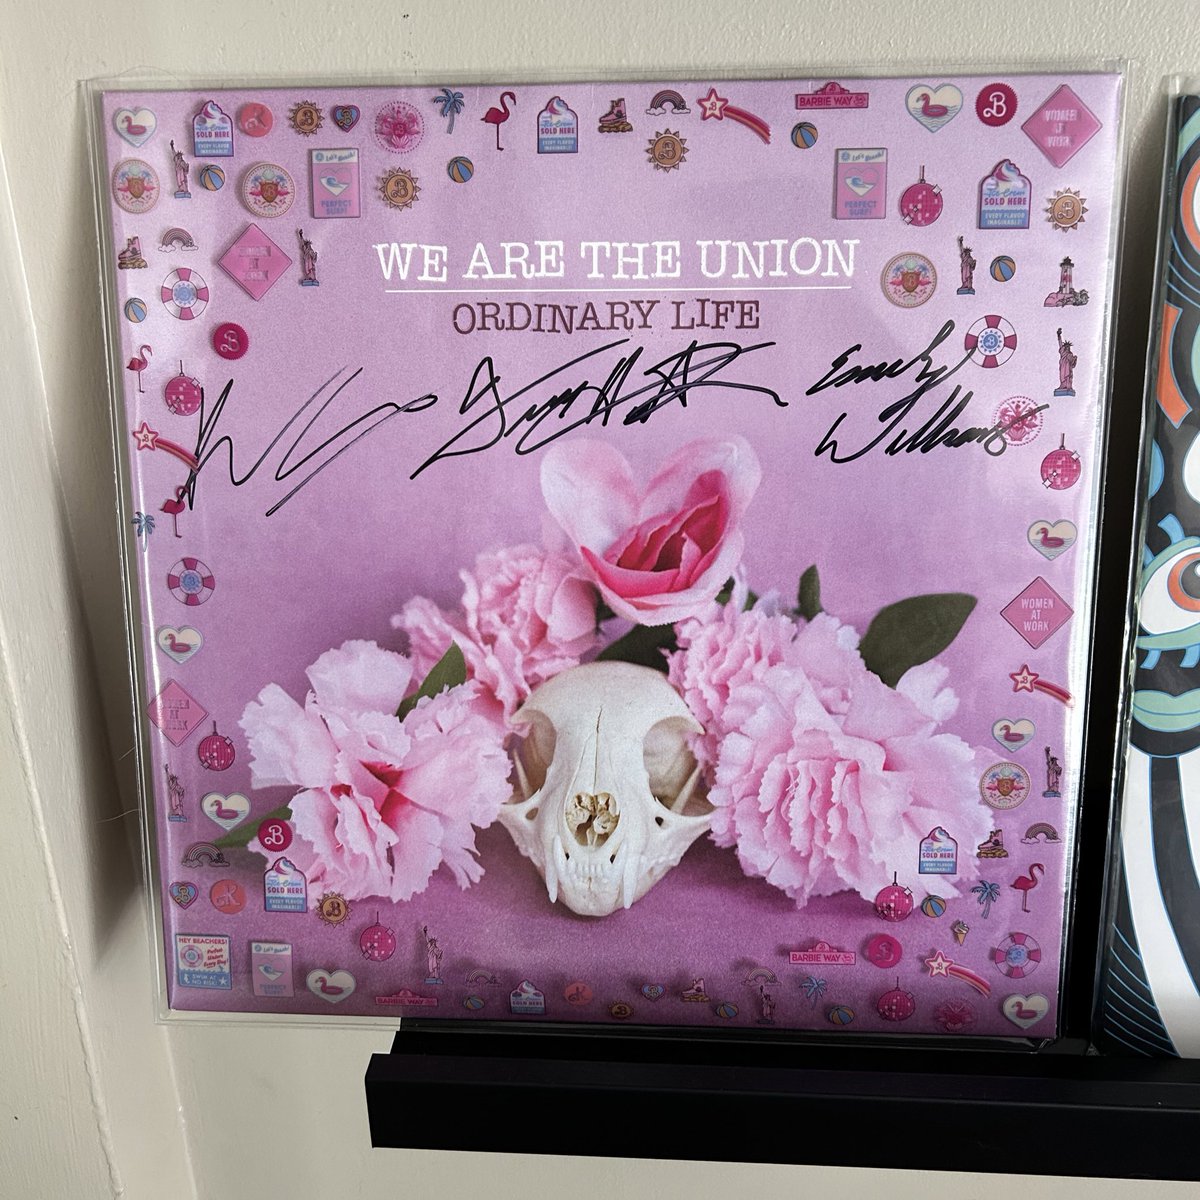 The Barbie promotional LP sleeve with the @wearetheunion record is kinda a vibe??